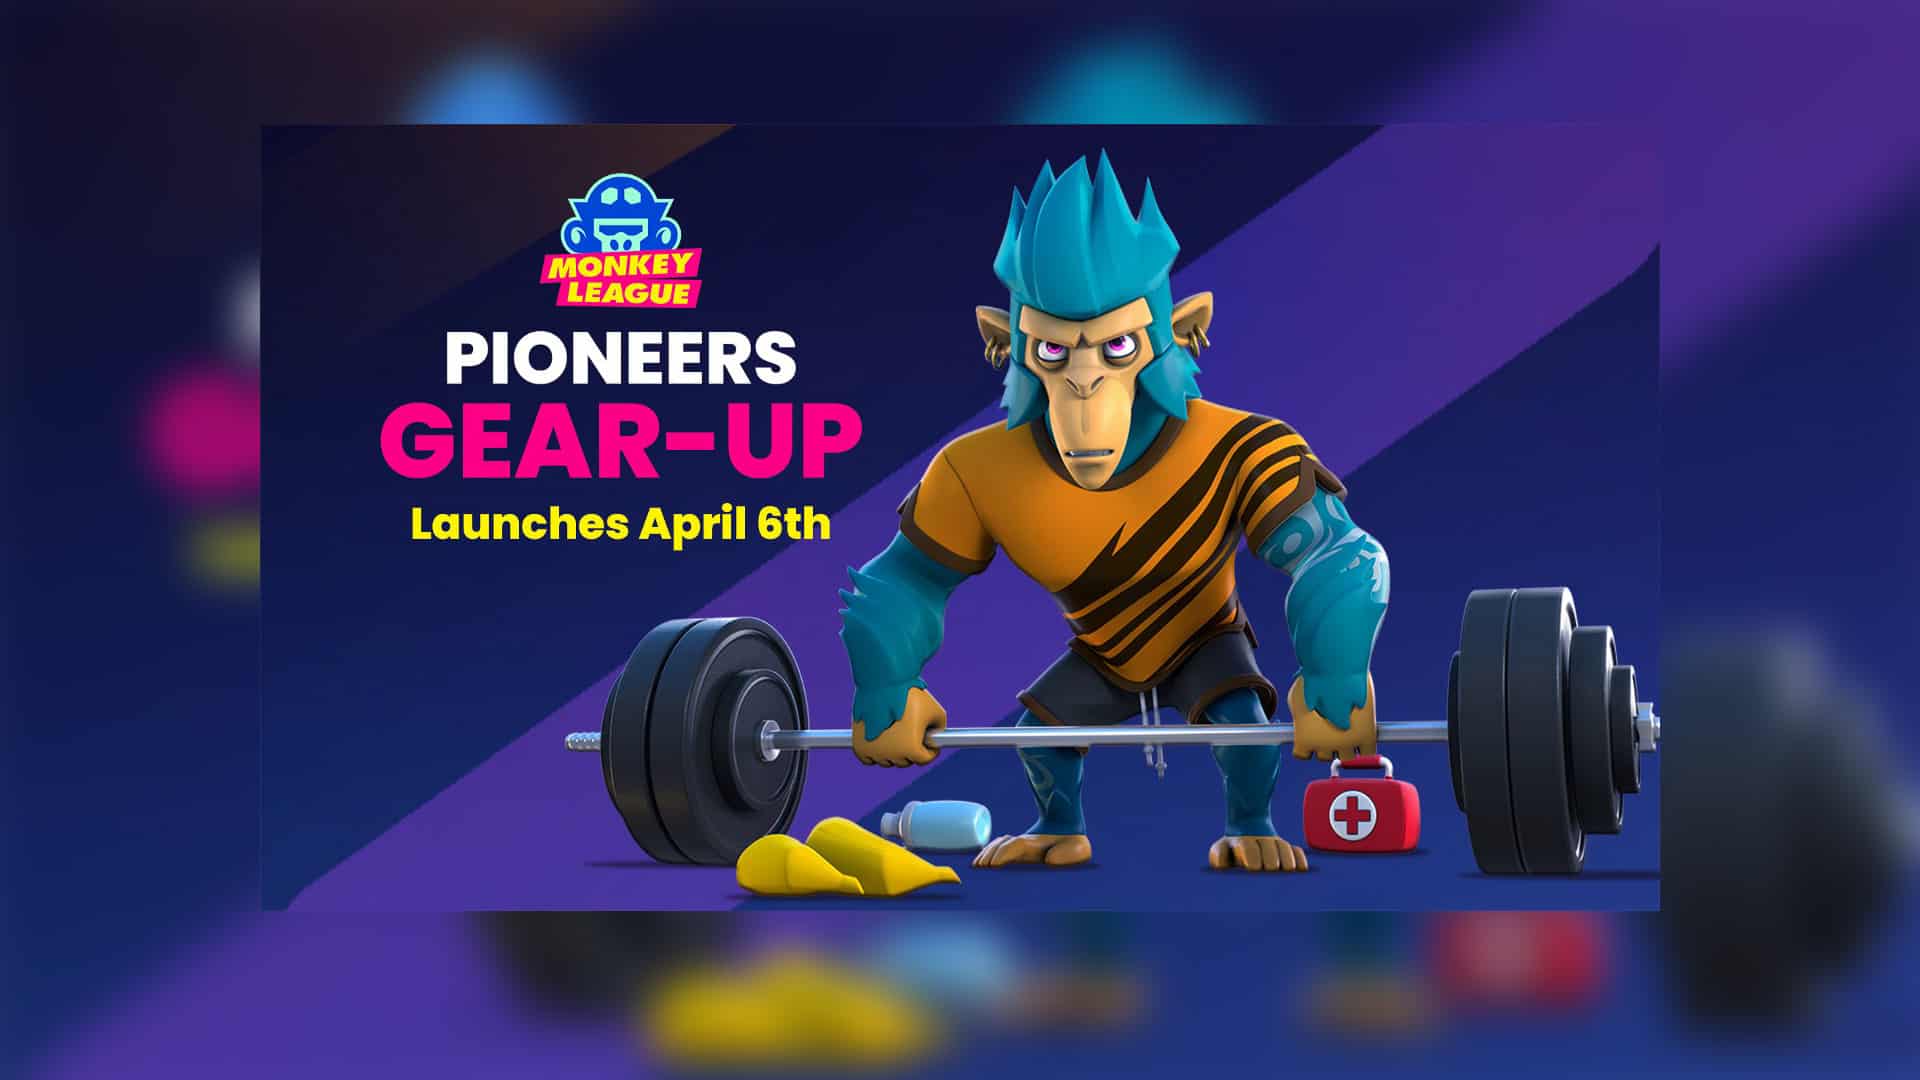 MonkeyLeague Achieves First Major Game Milestone As Its Gears Up For Pioneers Event